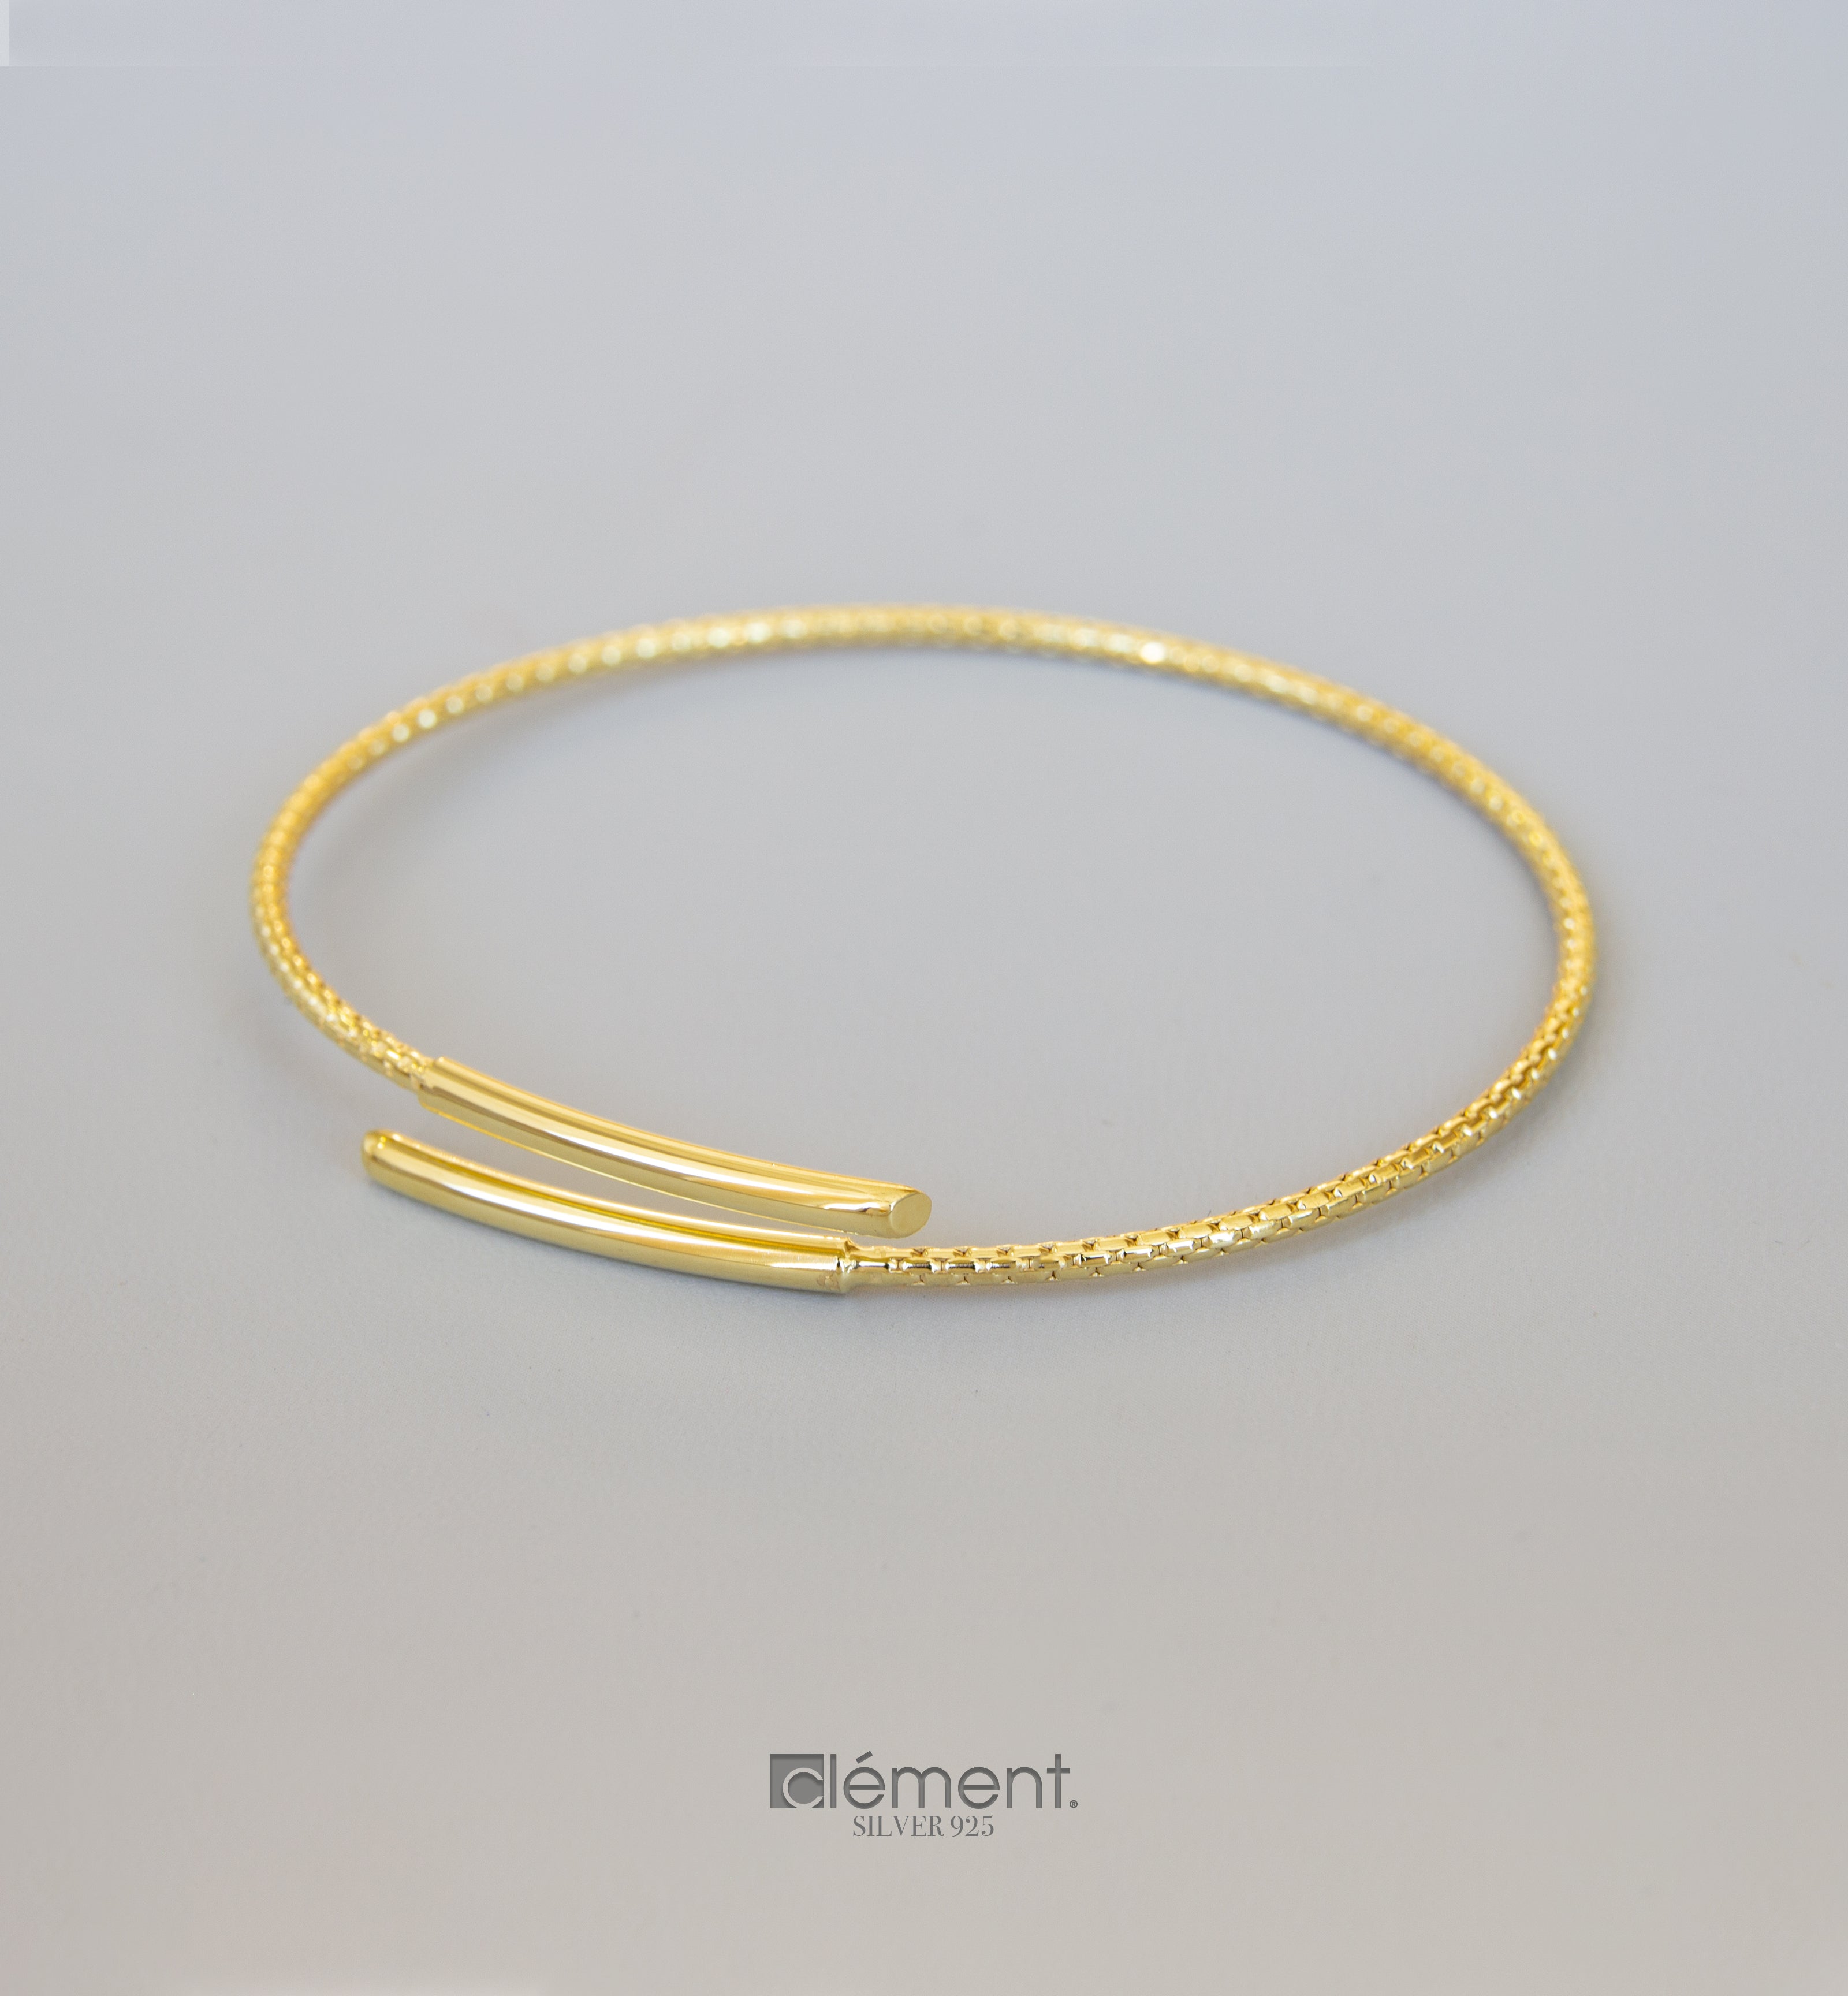 Silver 925 Yellow Gold Plated Bangle